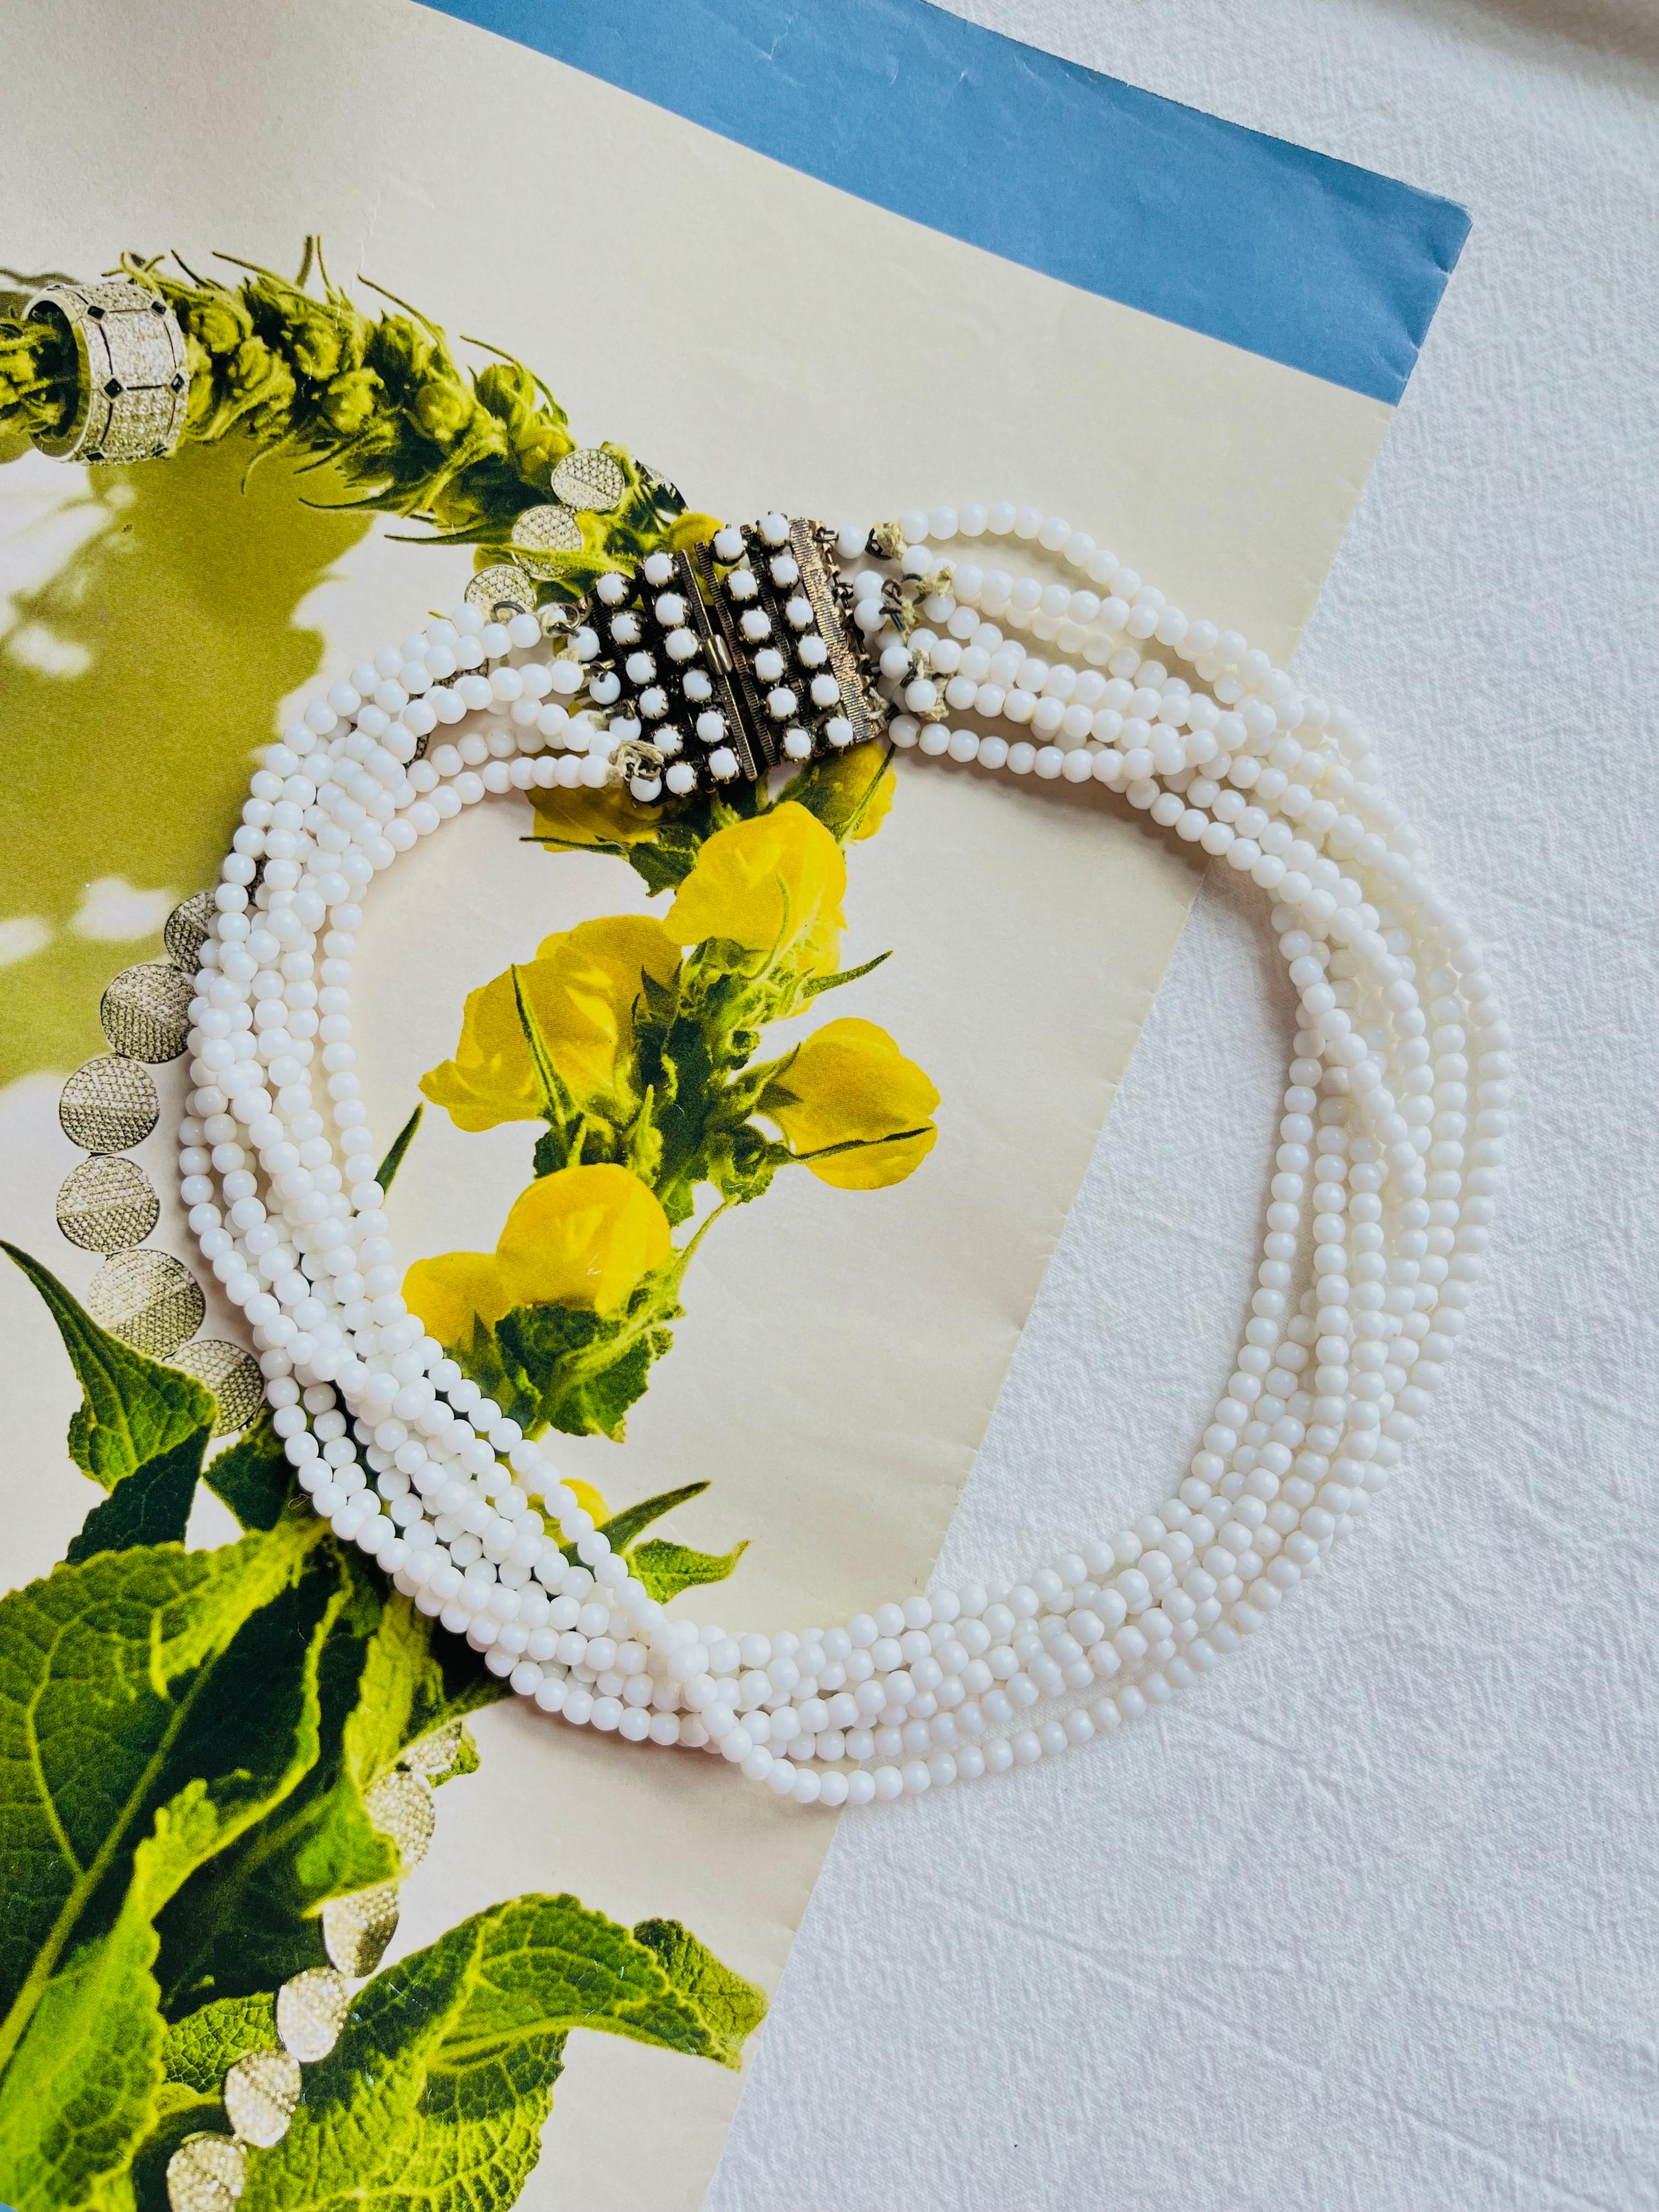 Christian Dior Vintage 1962 Eight 8 Strands Milk White Glass Bead Layer Chunky Statement Necklace

Good condition. Not any stones lost. Clasp is secure. 

However, the necklace has been repaired. Still very good to wear. Cannot be seen when wear it.